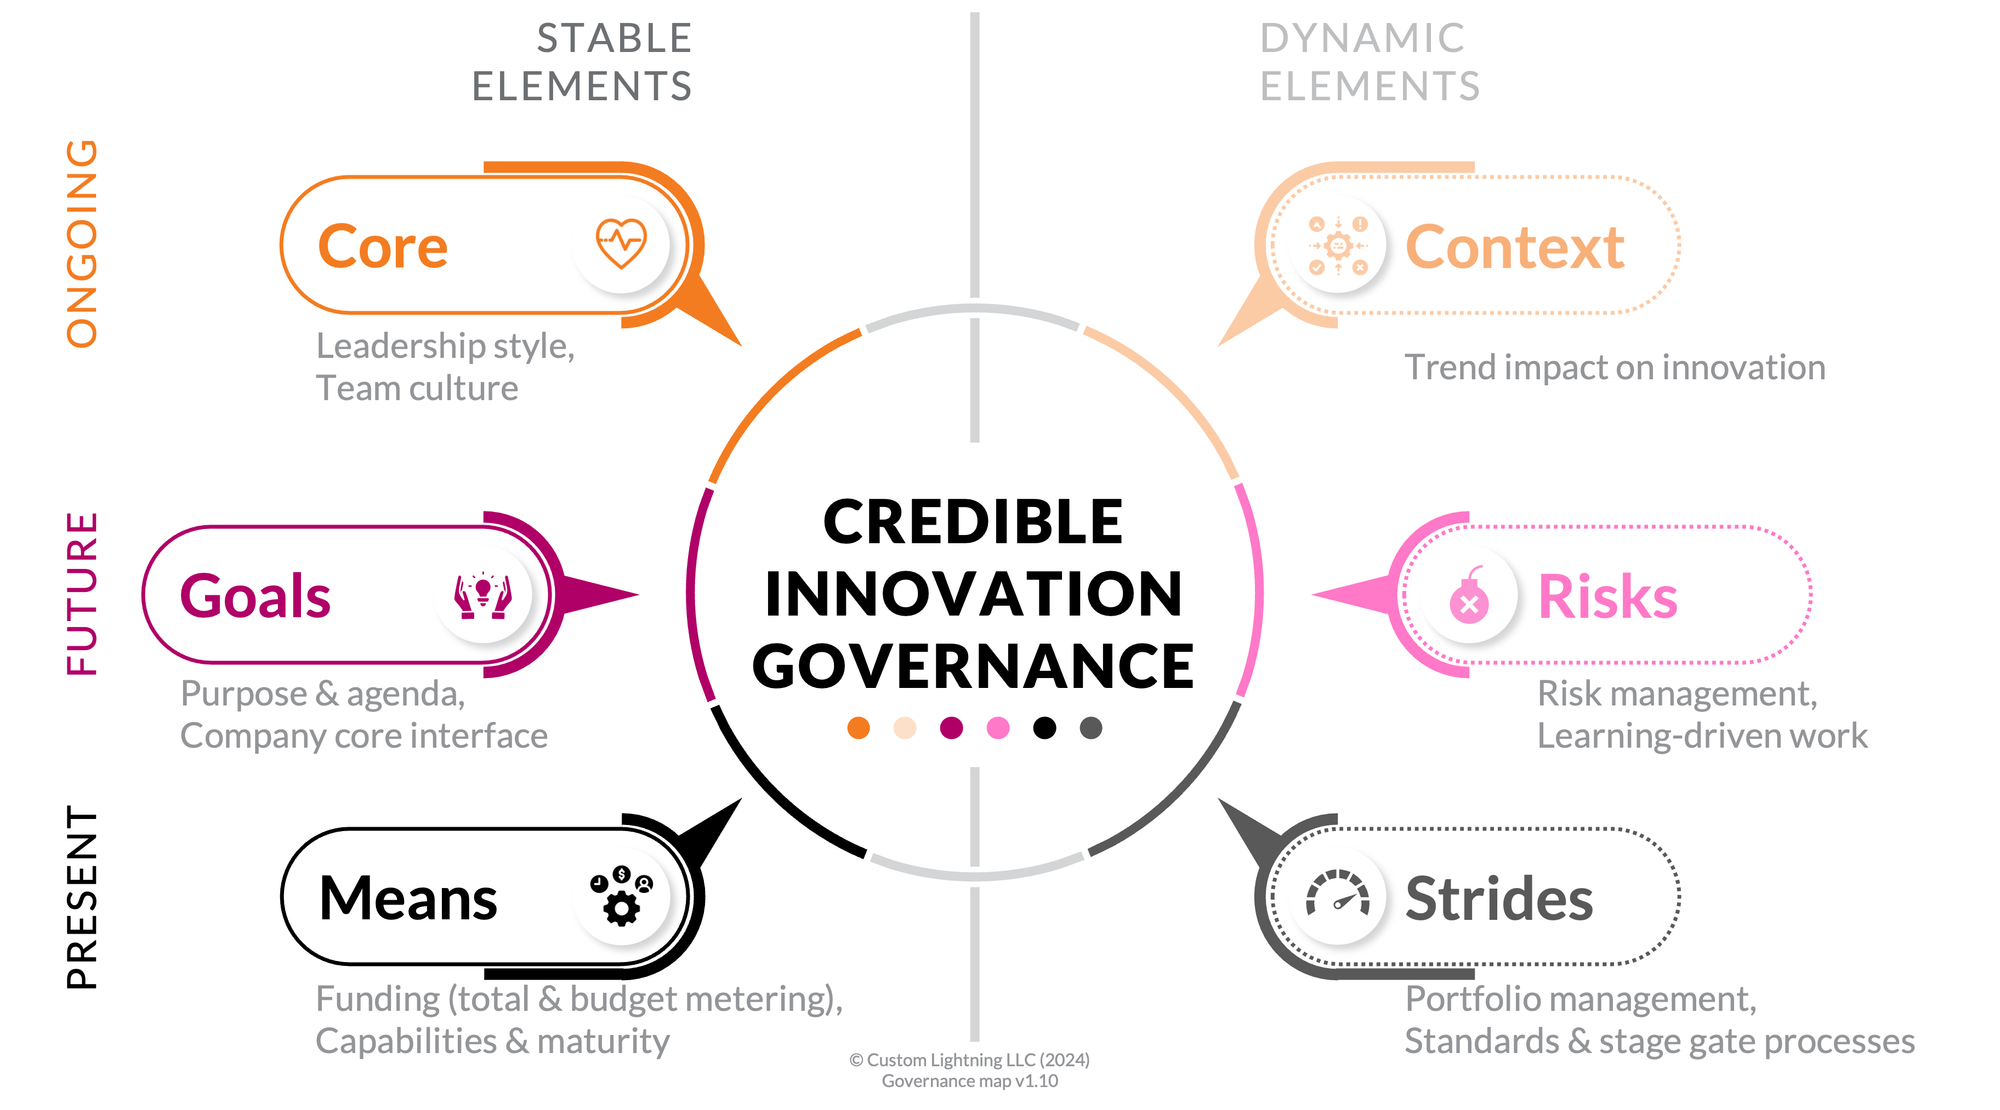 A colorful framework of 6 "credible innovation governance" topics around a central circle, with topic annotations